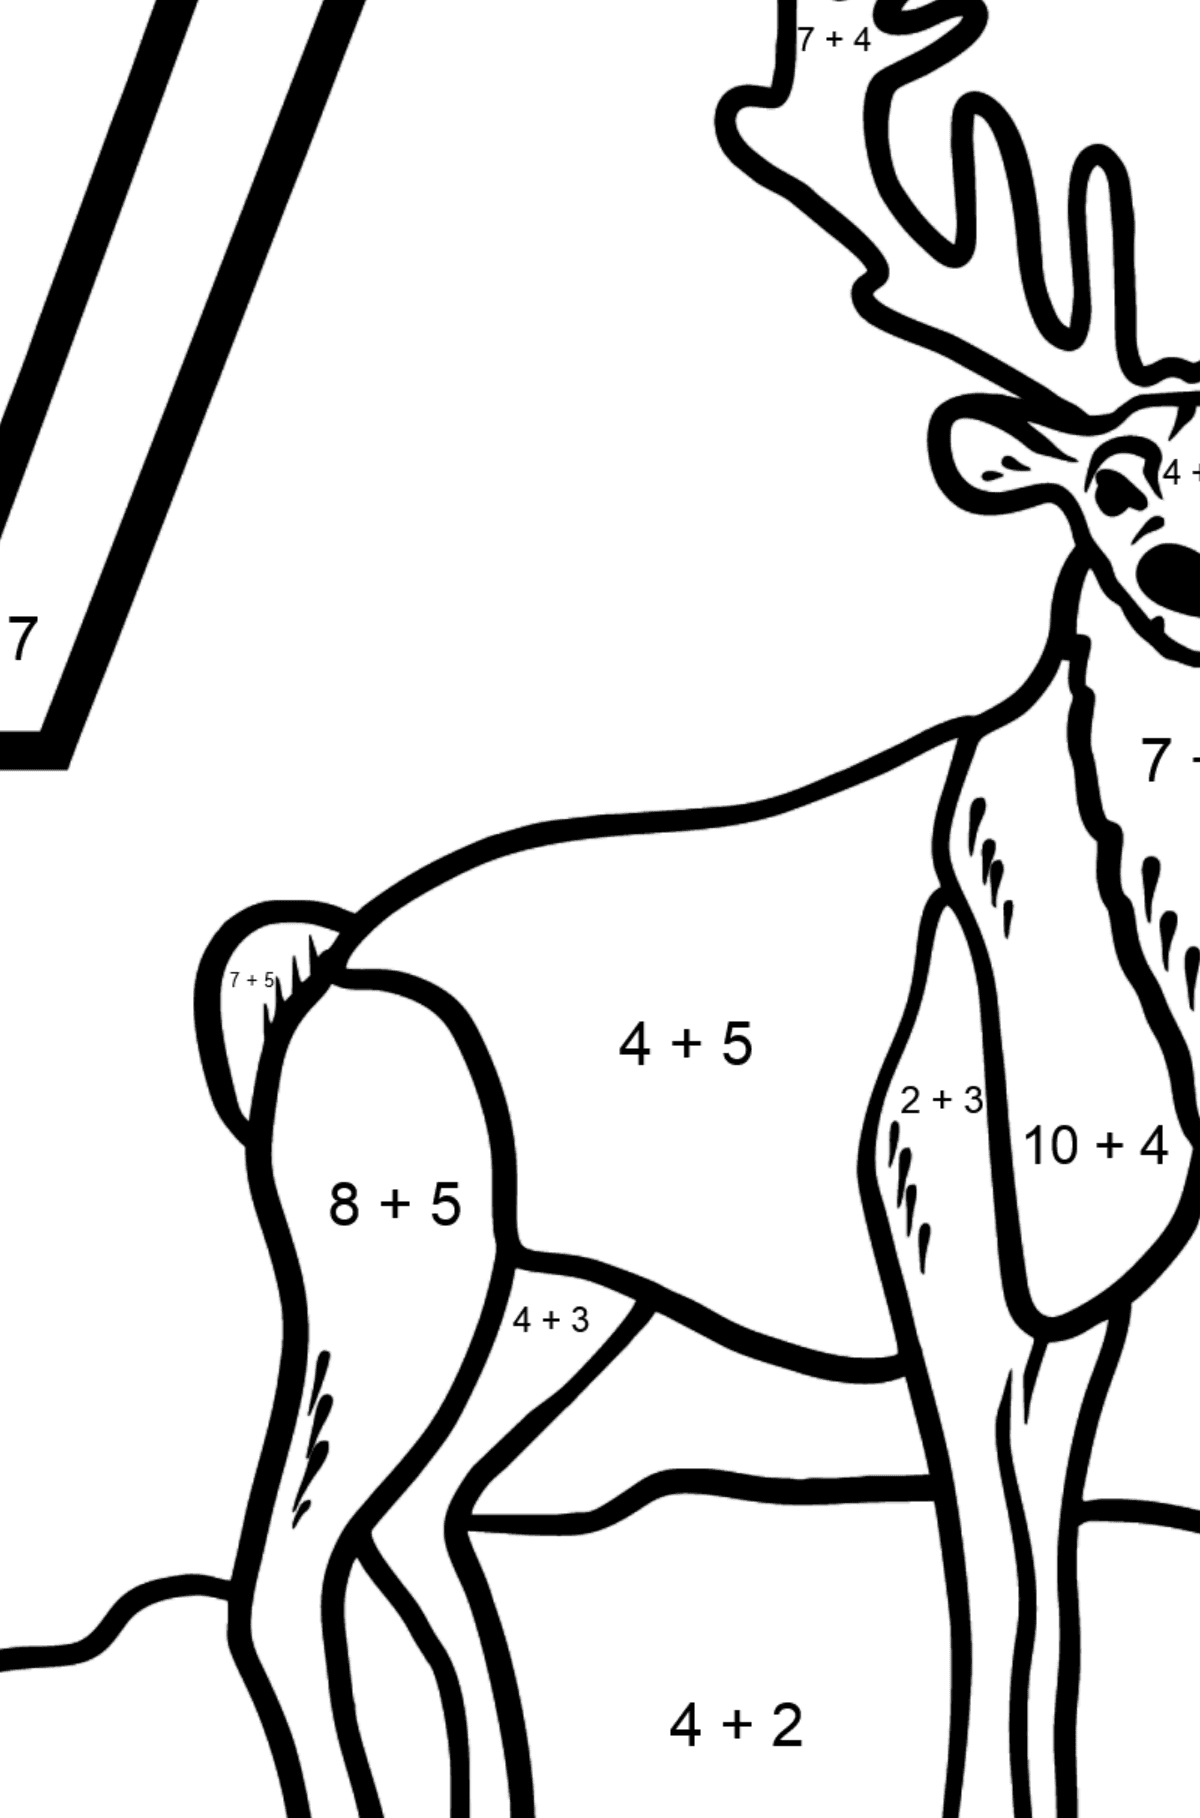 Portuguese Letter V coloring pages - VEADO - Math Coloring - Addition for Kids